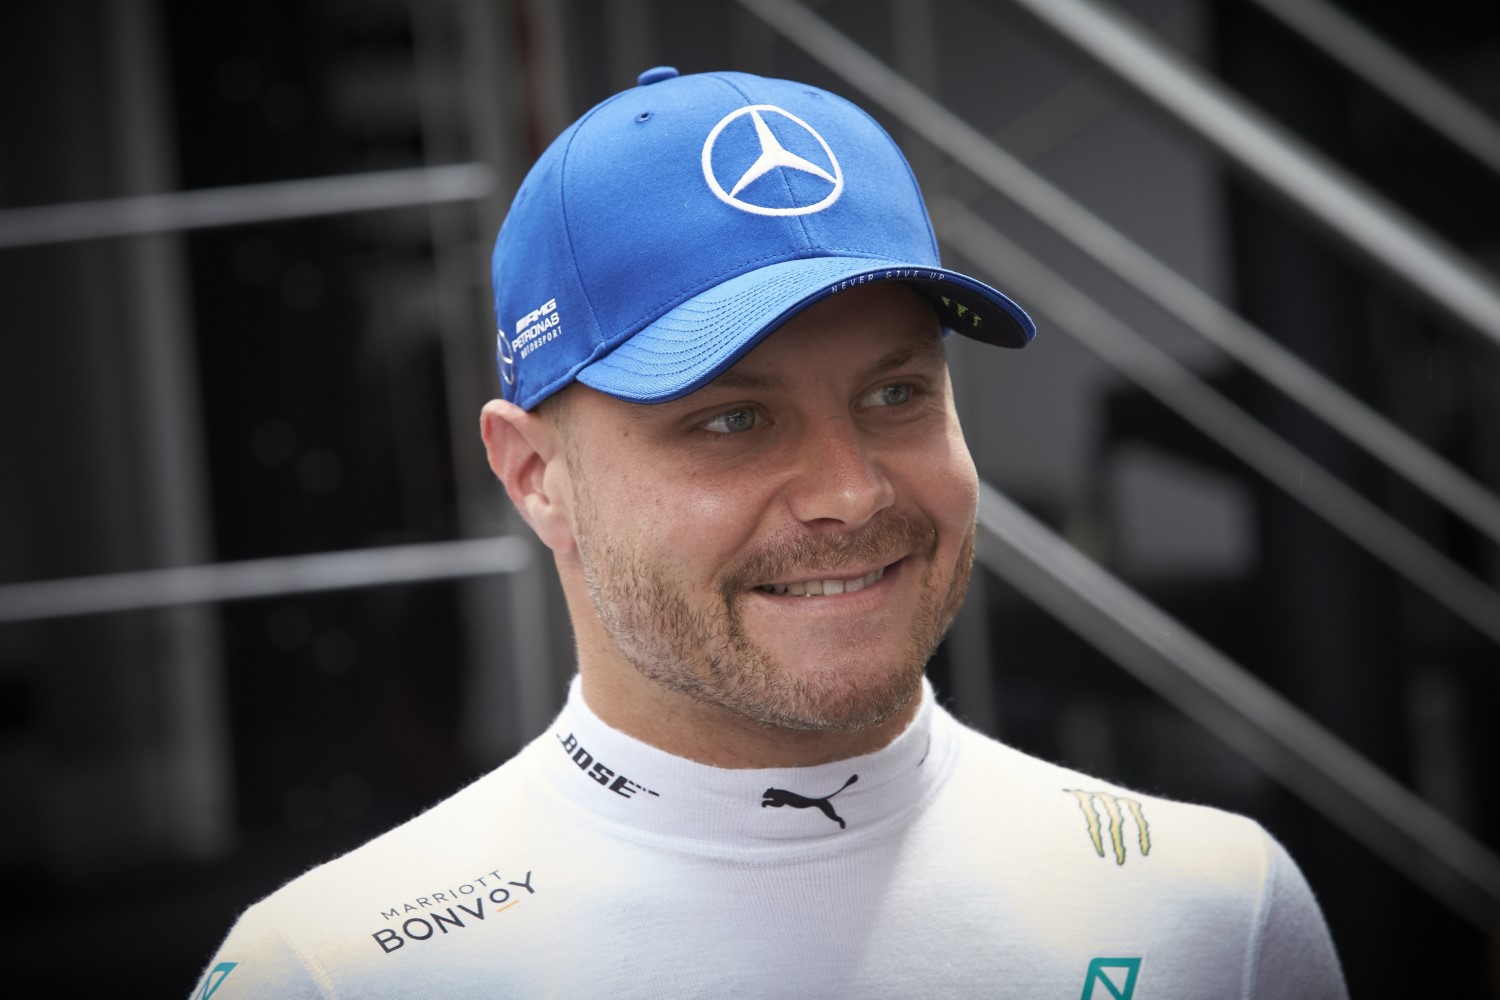 For Bottas Plan A must be a move to Williams, Plan B a Mercedes reserve driver